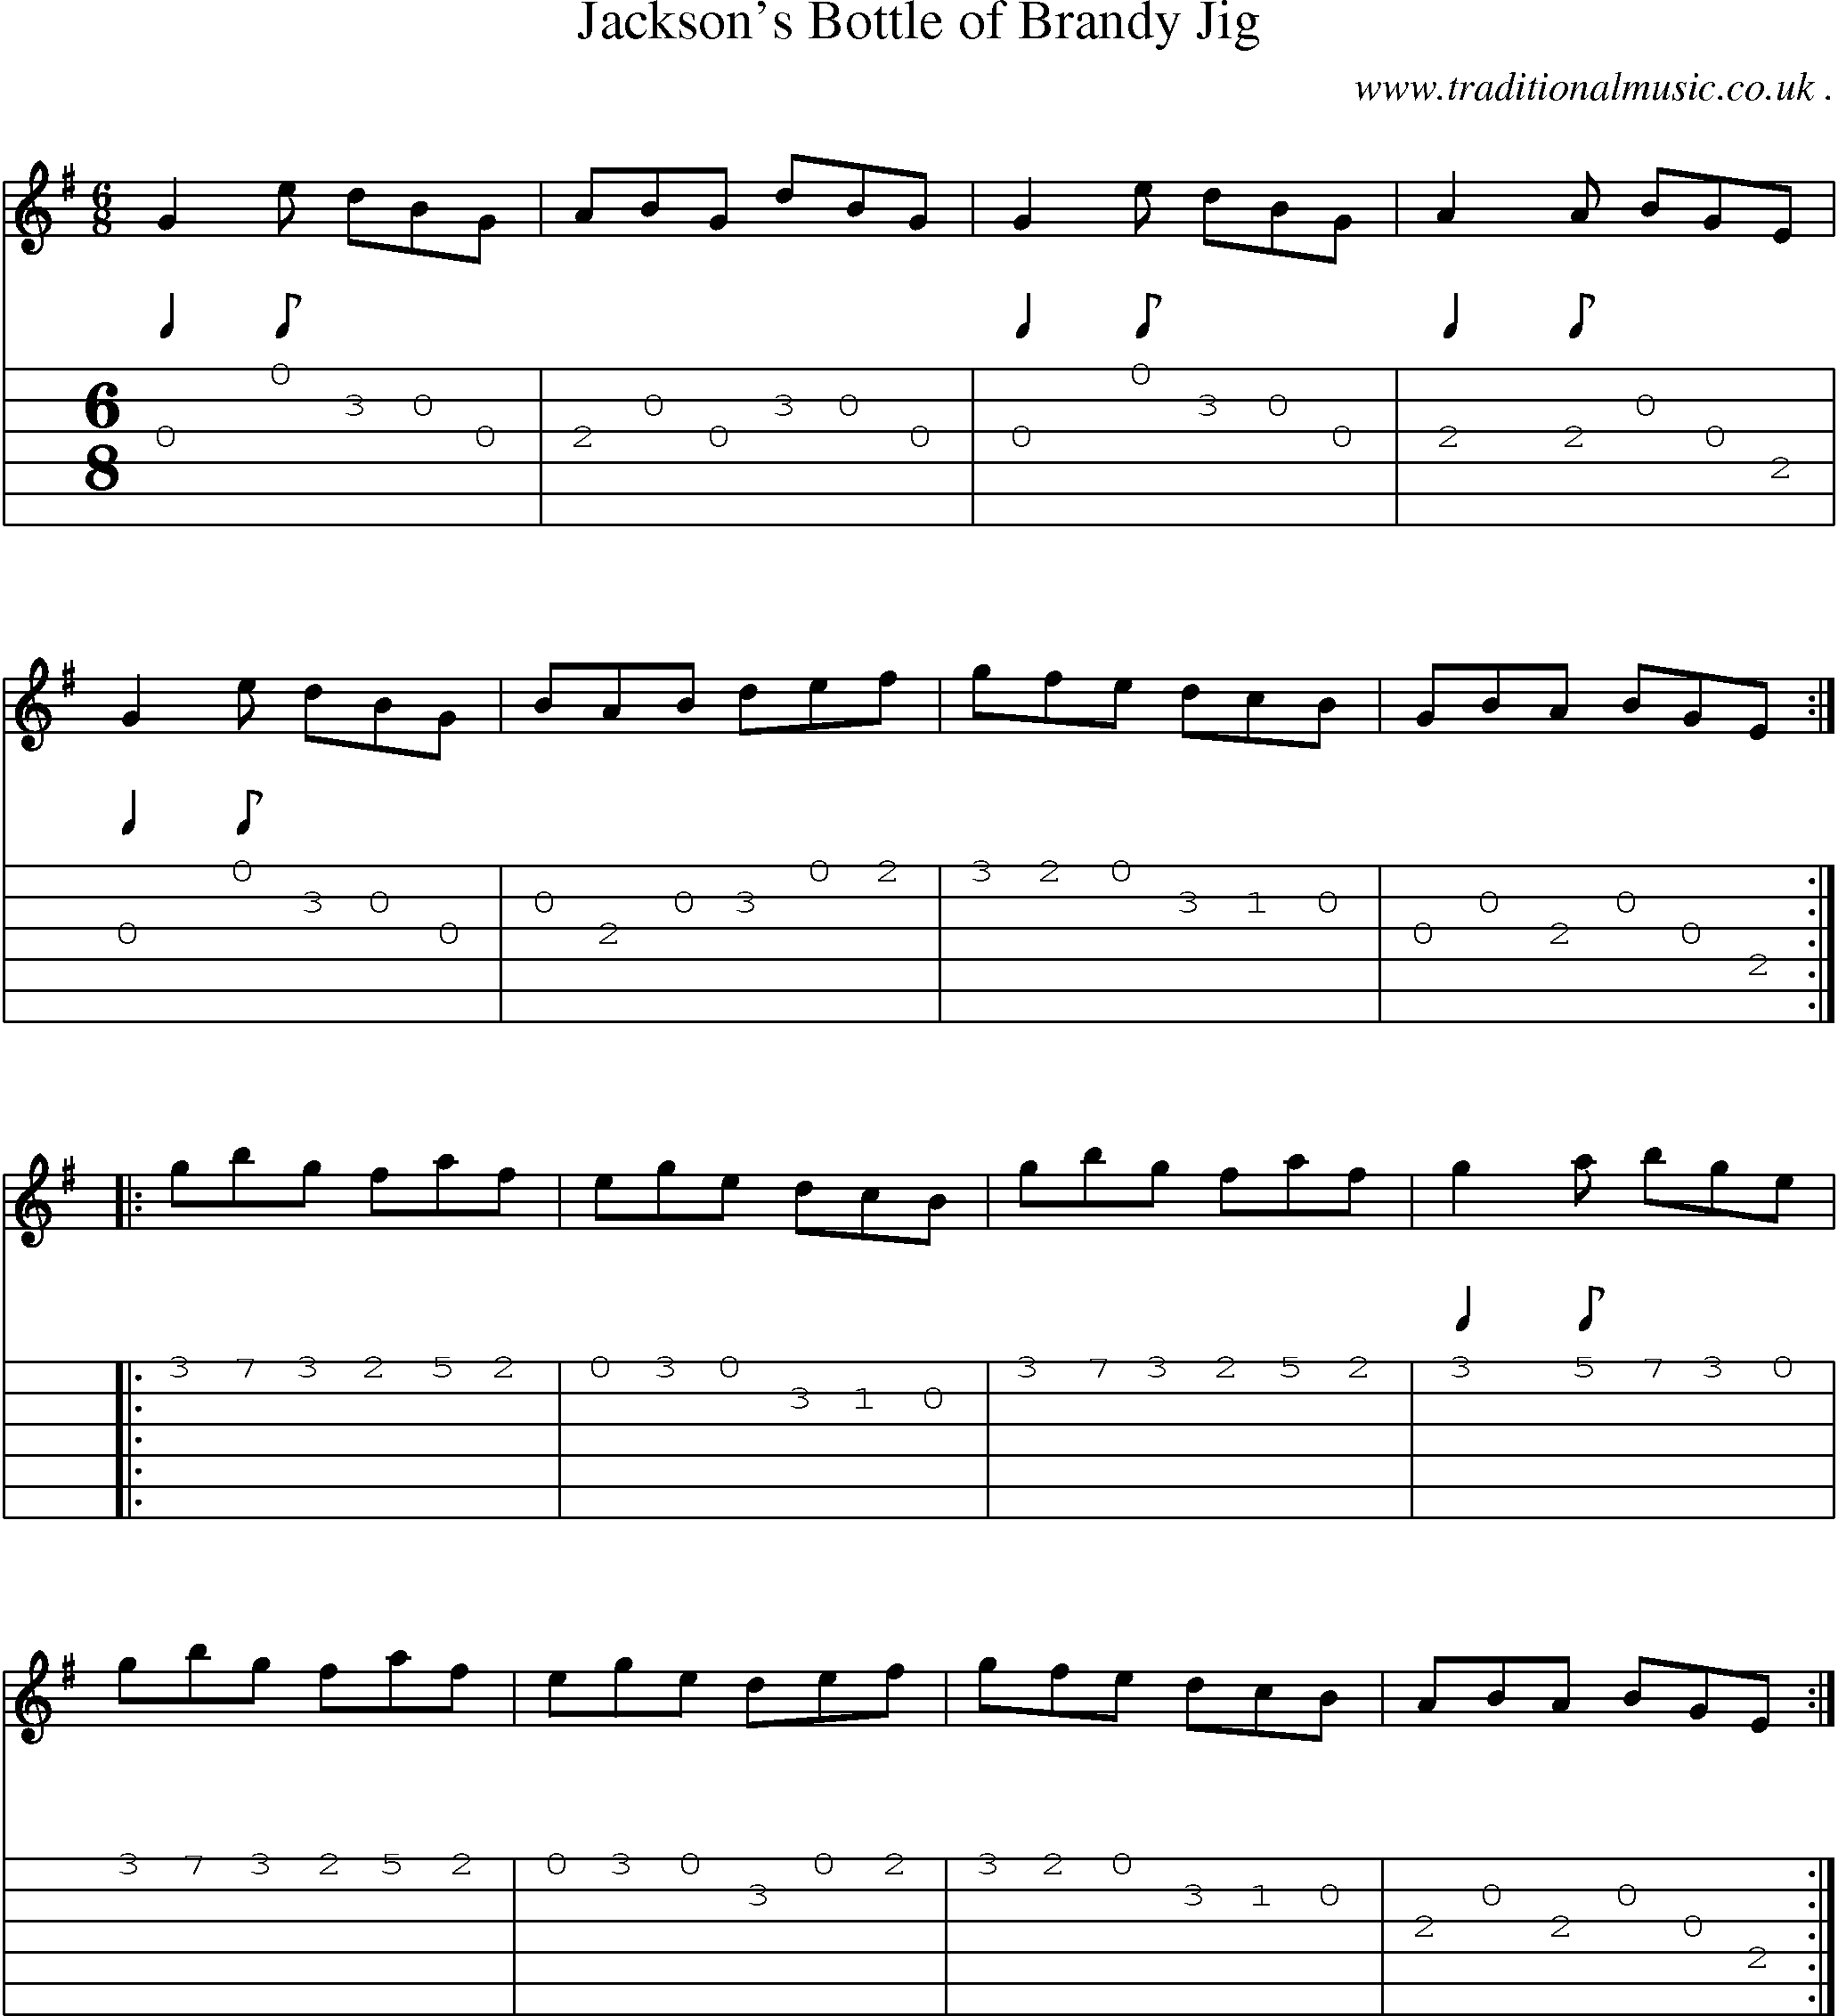 Sheet-Music and Guitar Tabs for Jacksons Bottle Of Brandy Jig